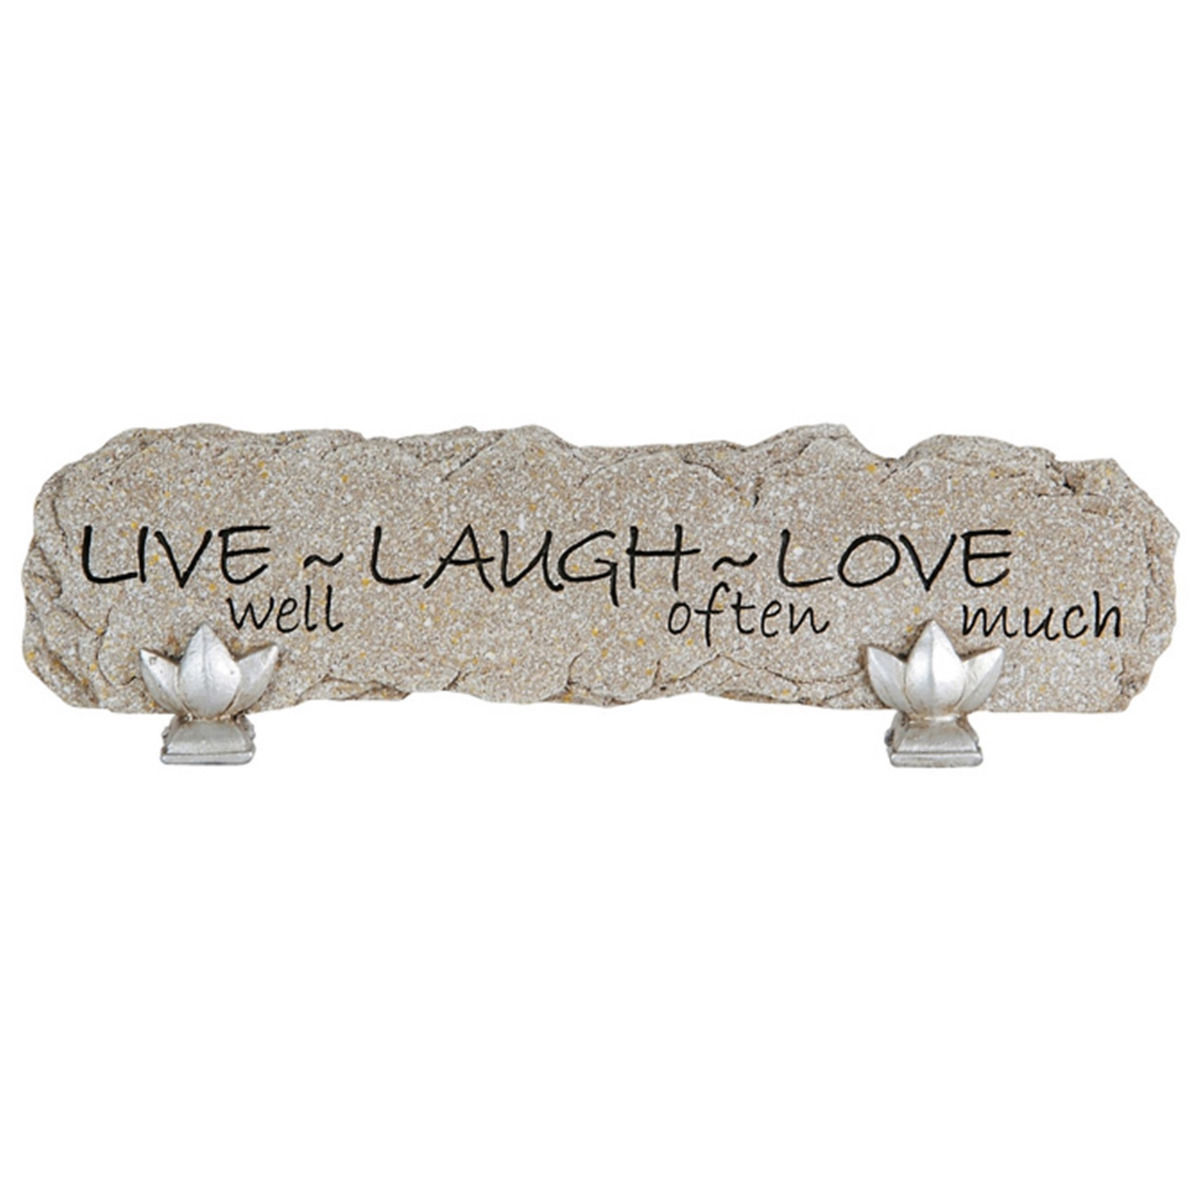 Live Laugh Love Tabletop Stone Bar Desk And 32 Similar Items